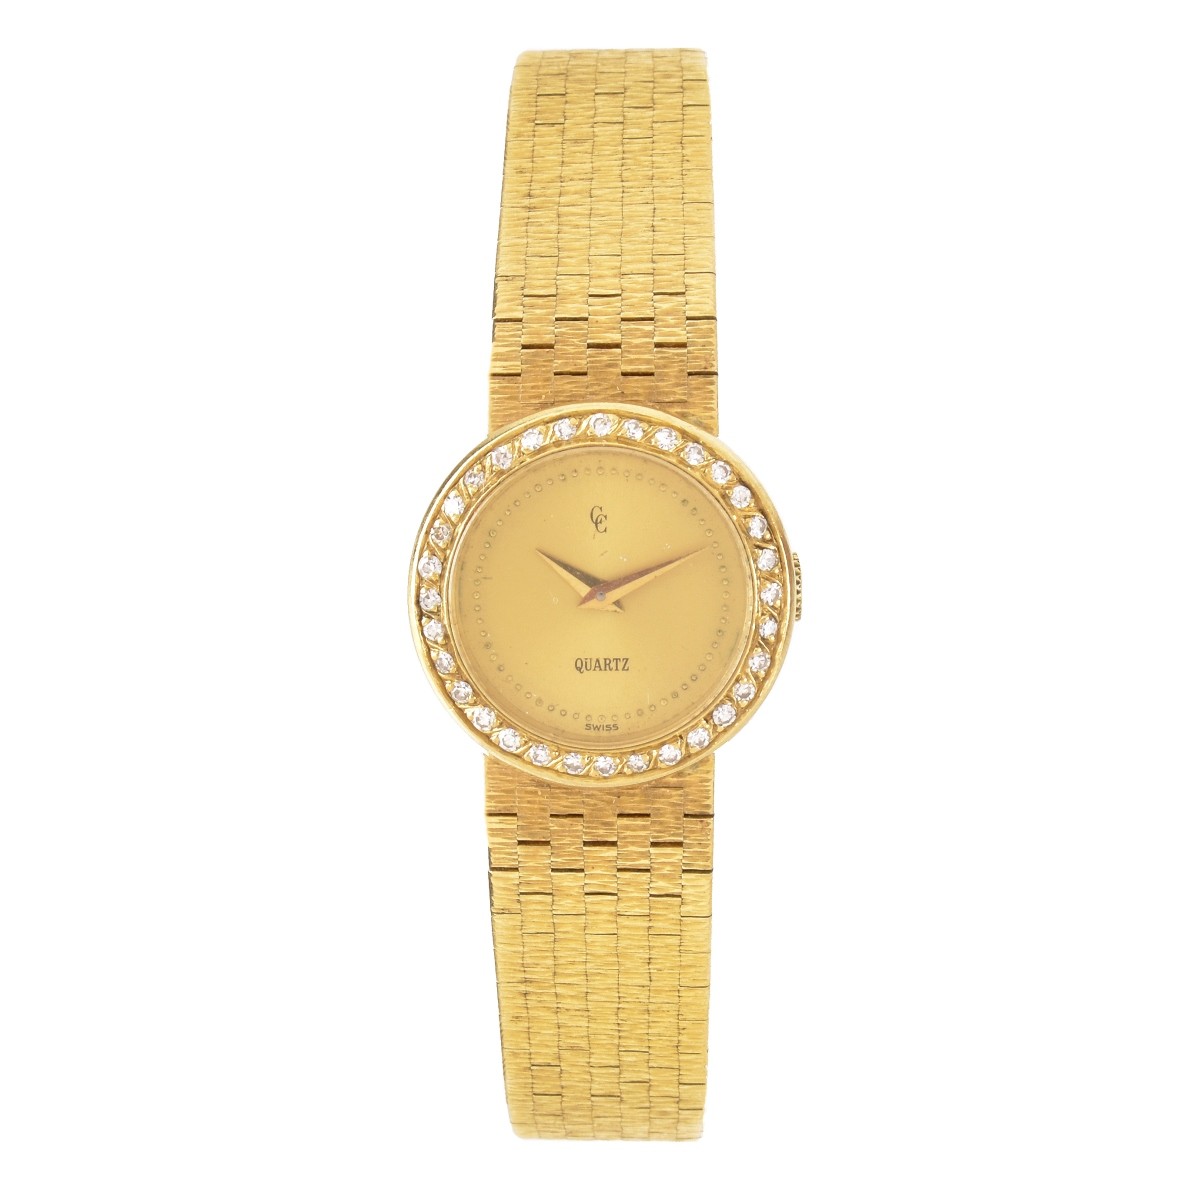 Lady's Concord 18K Watch